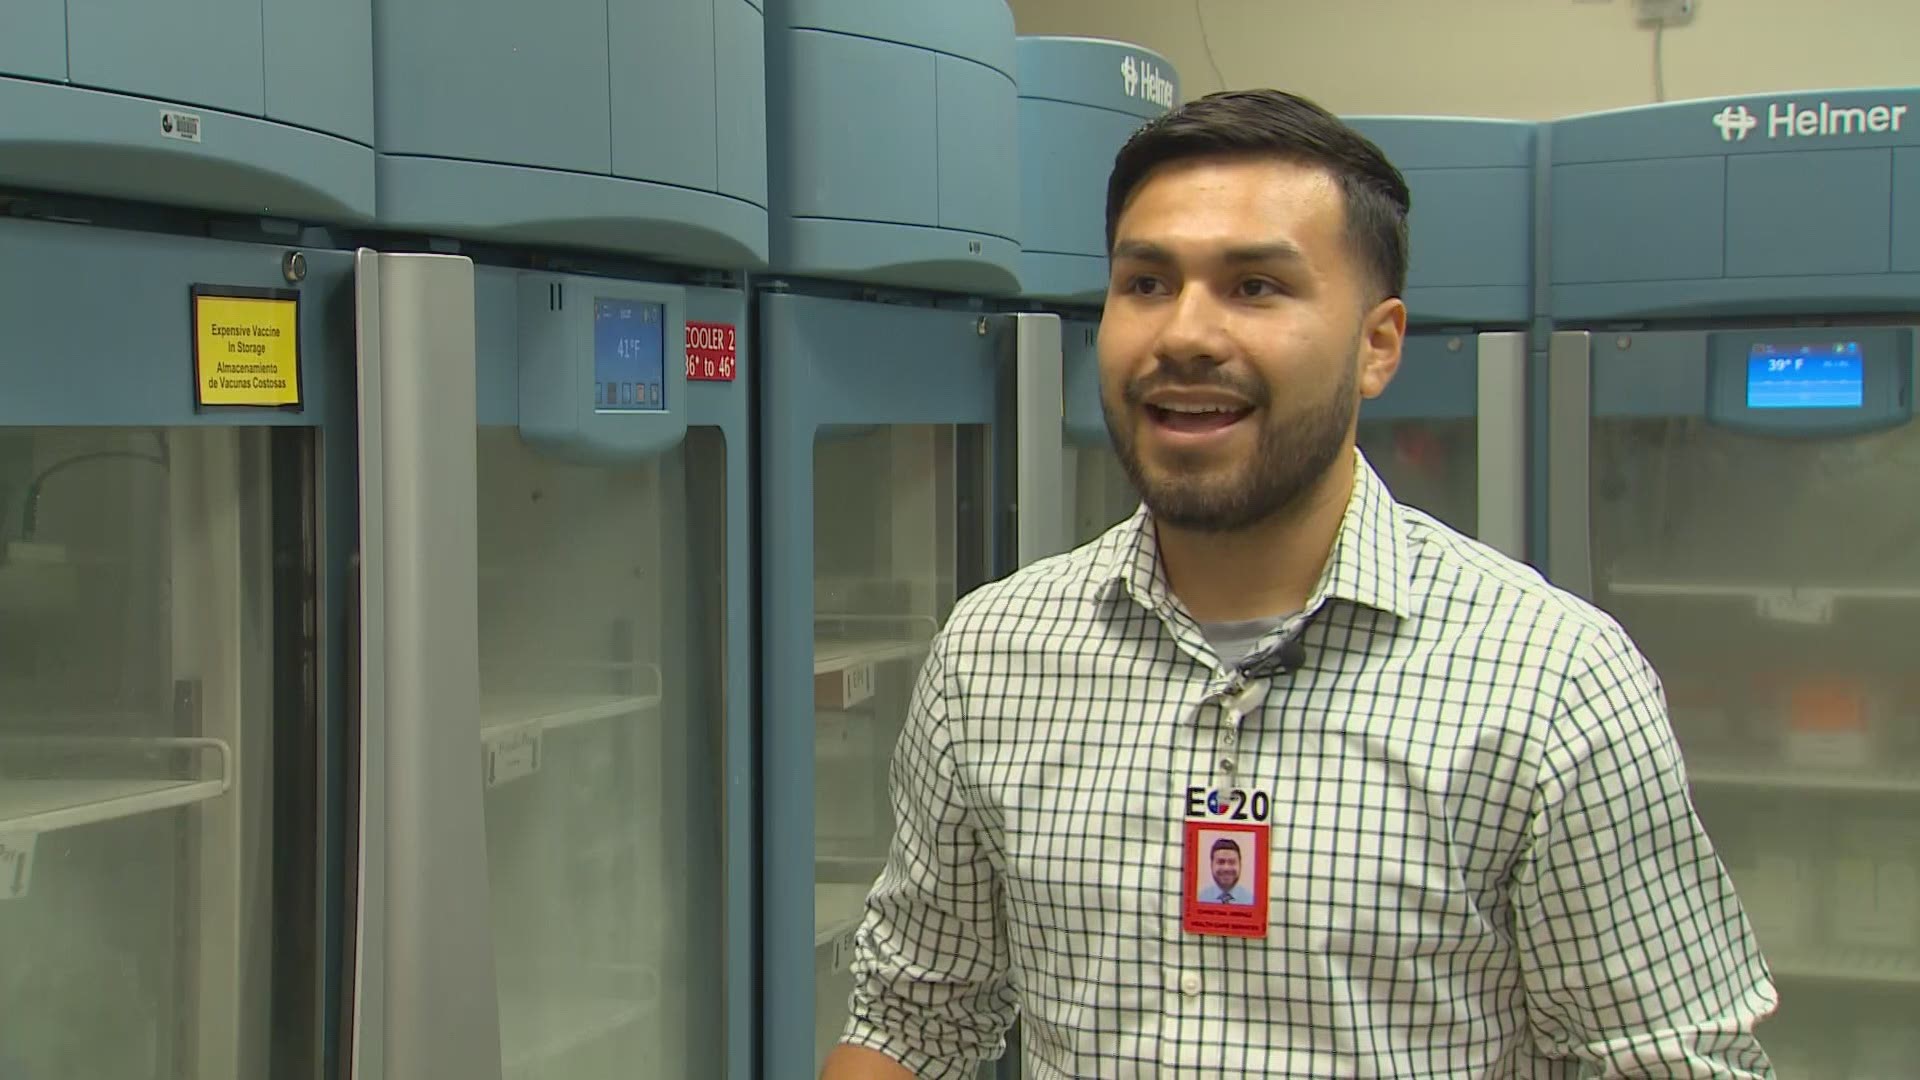 'We just want to make the vaccine as widely available as possible,' said Christian Jimenez of Collin County Health Care Services.